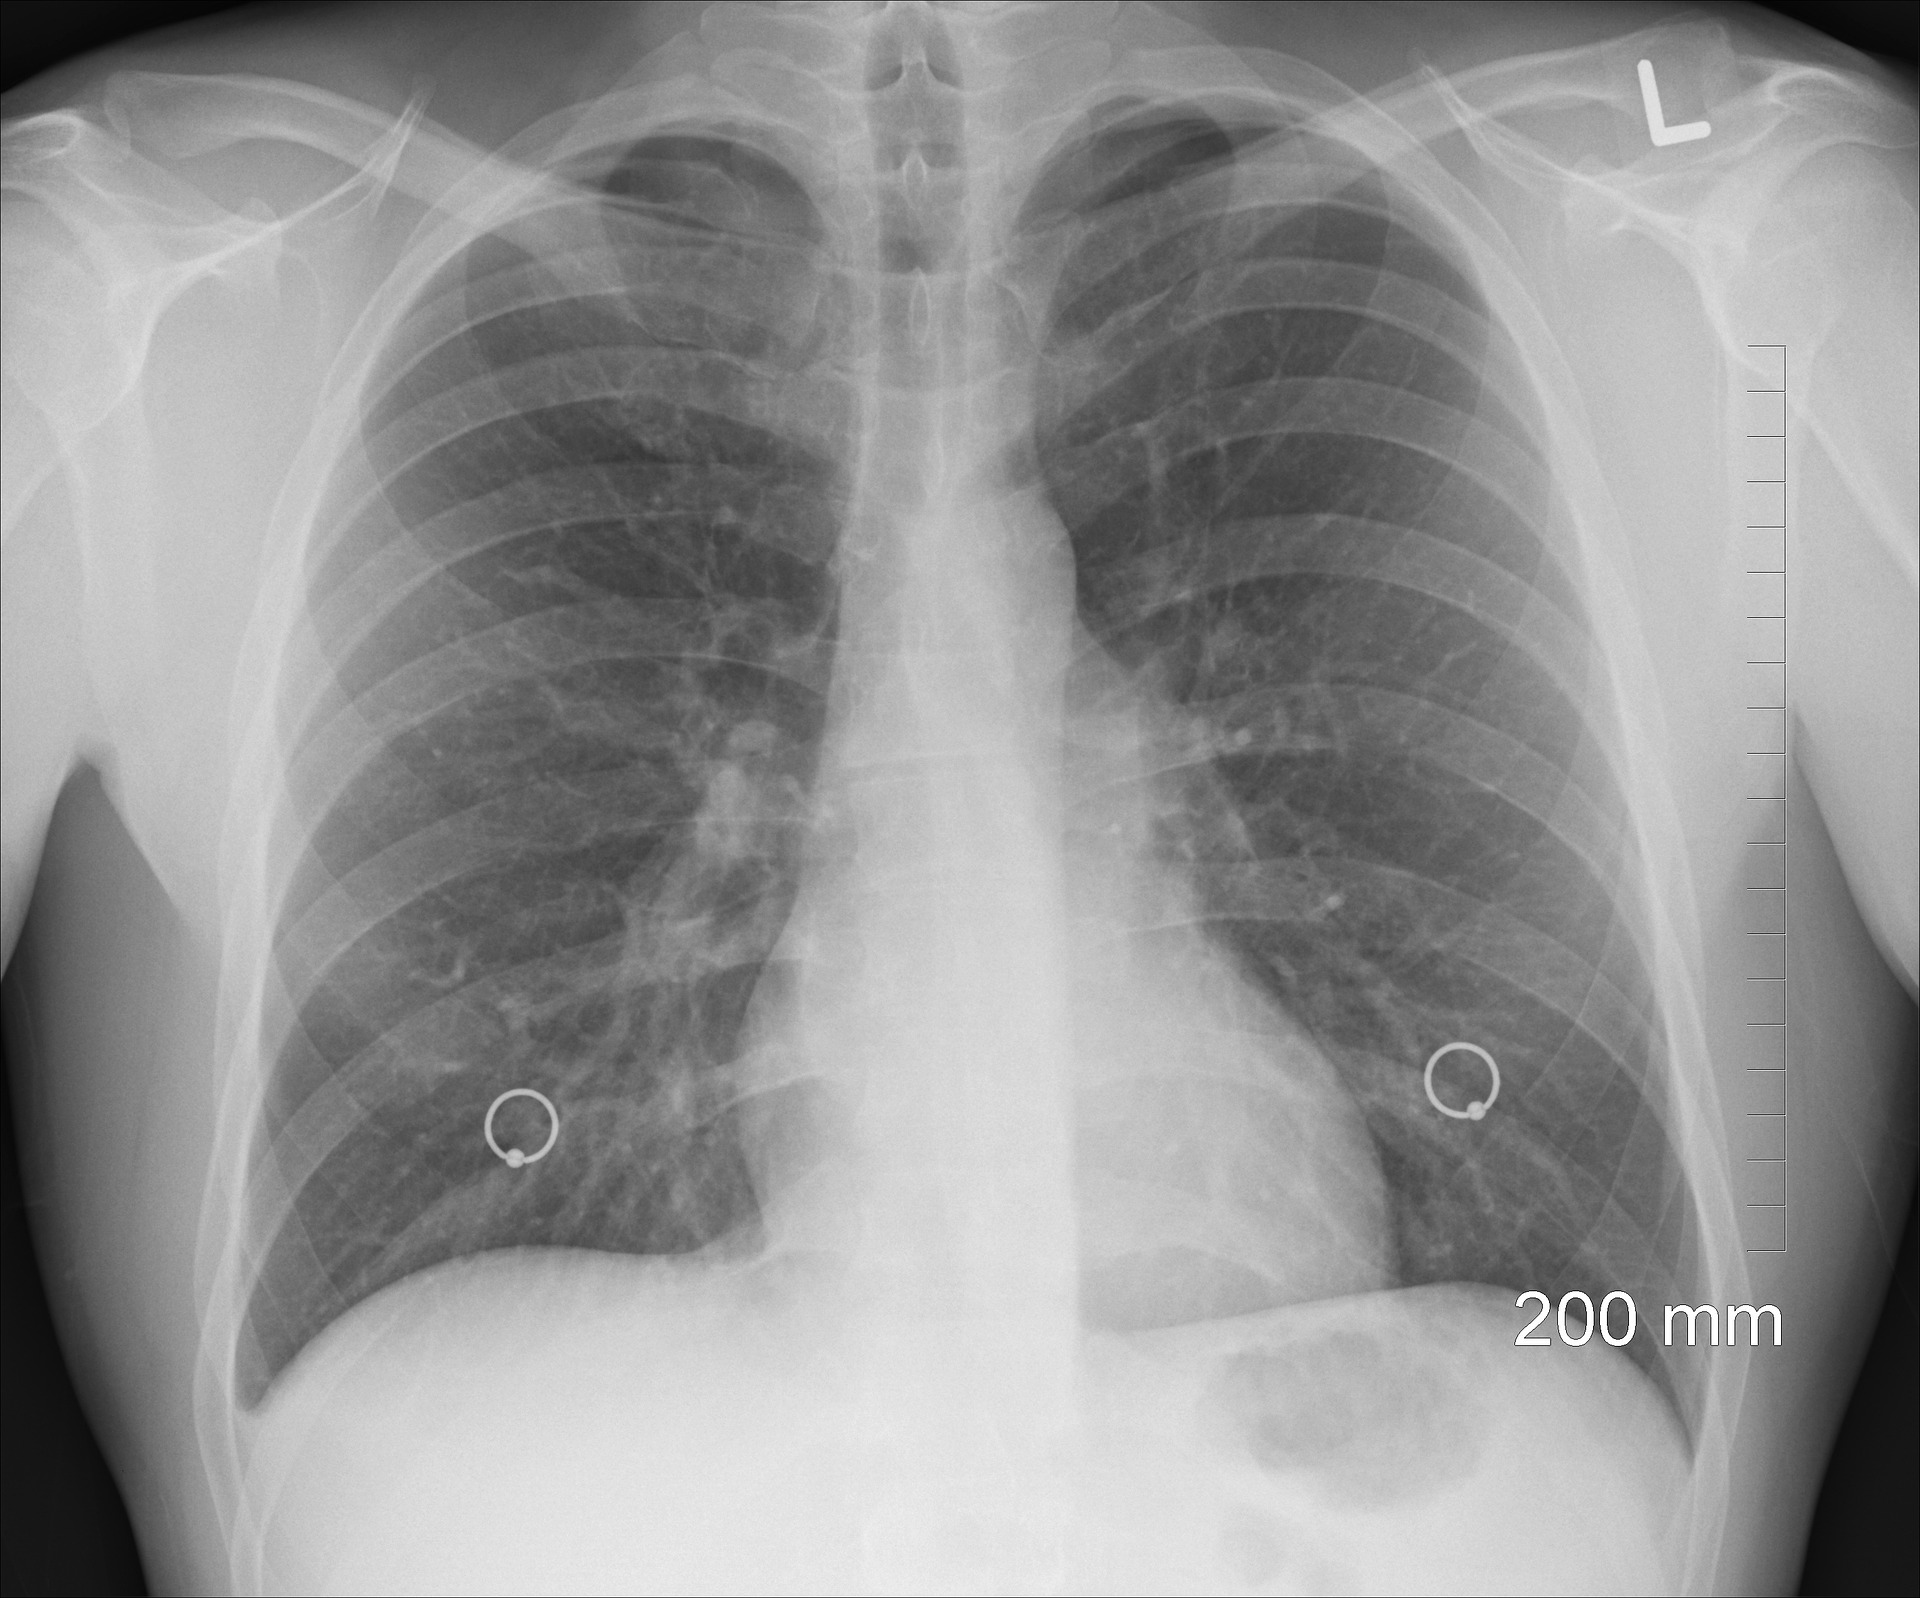 New Medical Research Foundation Grant for Tuberculosis Research